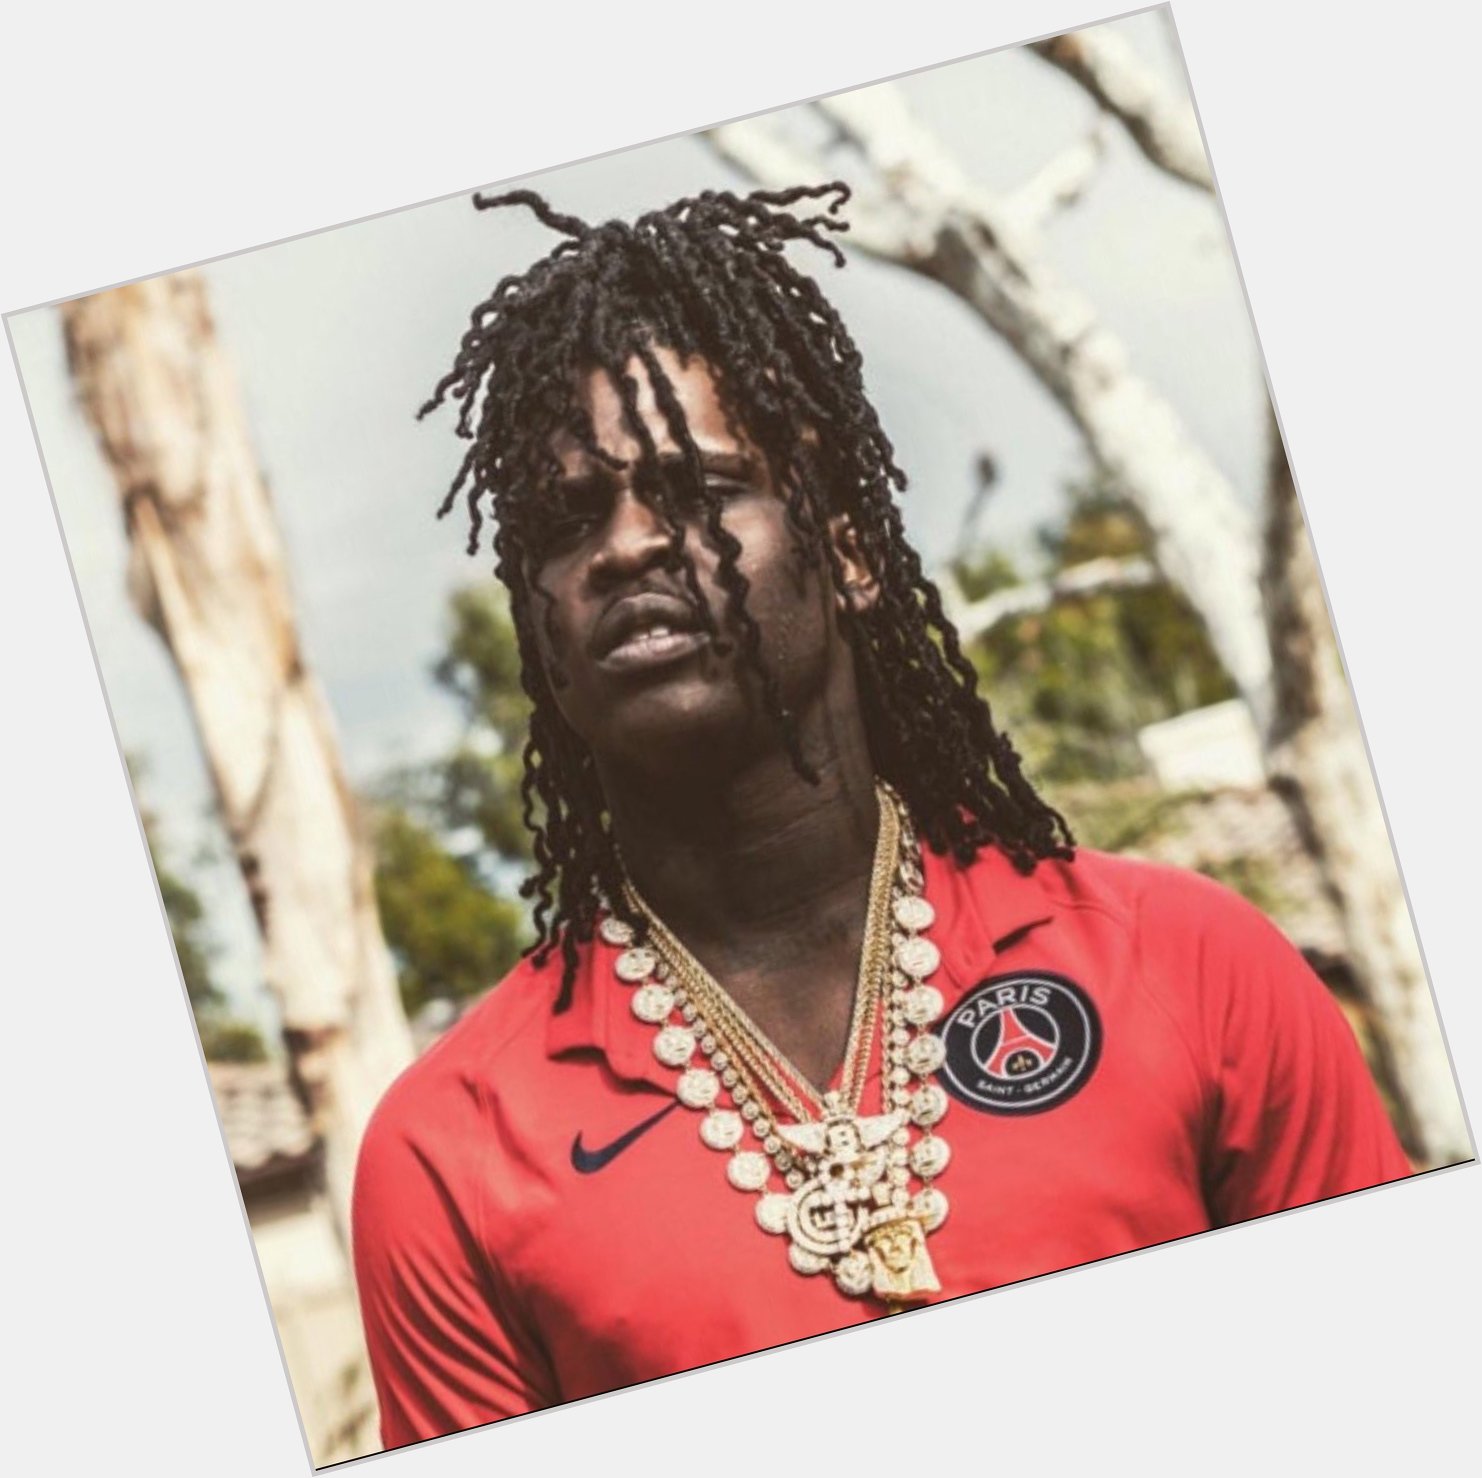 Today is birthday   HAPPY BIRTHDAY CHIEF KEEF   